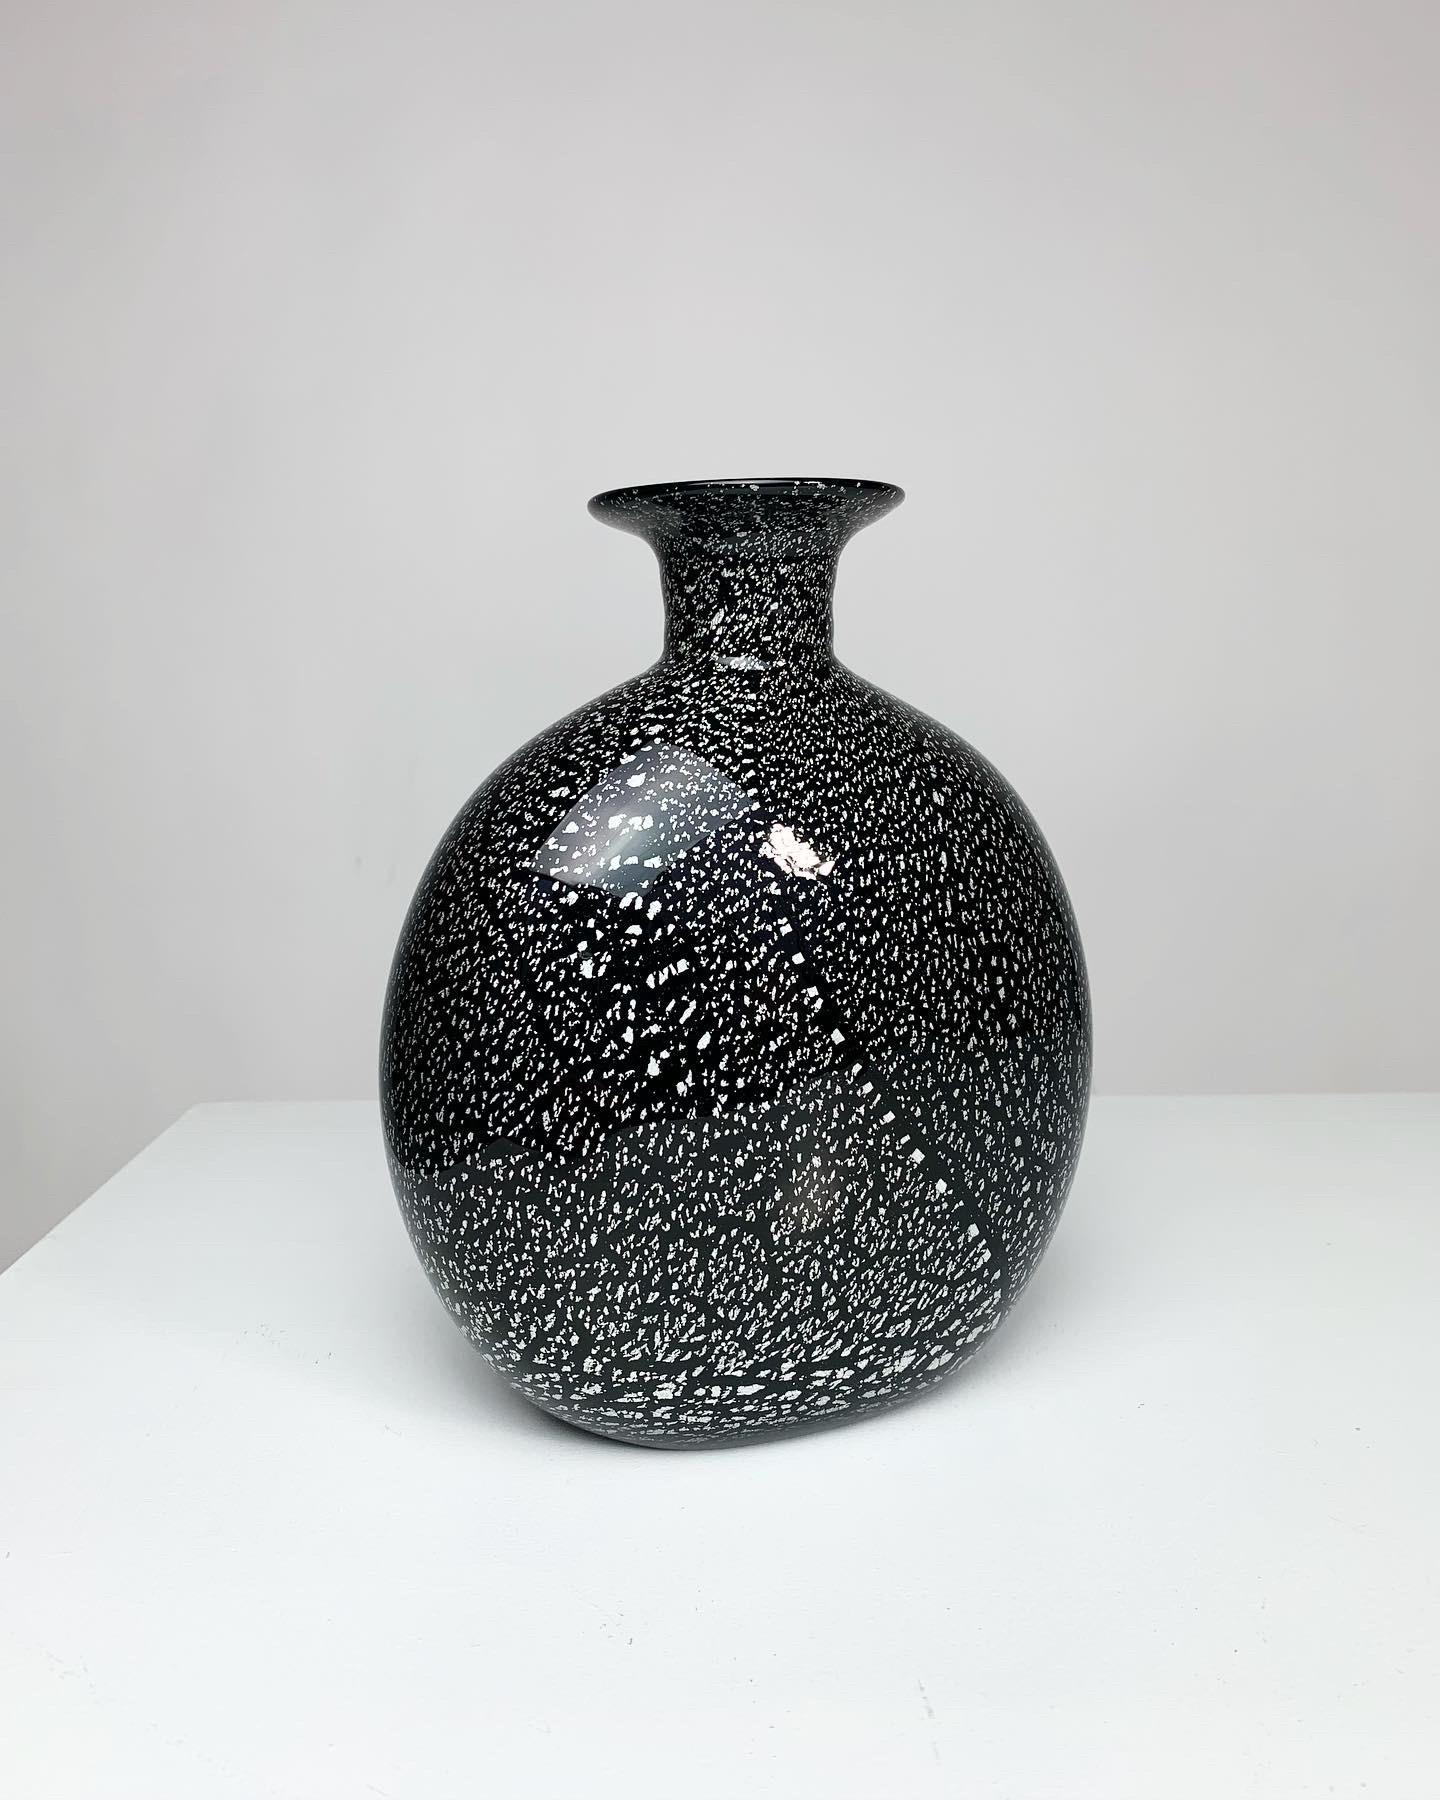 Shimmering glass vase by Archimede Seguso, mouth-blown in Murano in the 1970s. Black glass with silver flecks, beautiful hand-shaped piece.
 
Remains the original manufacturers sticker.
 
Height: 20 cm
Width: 16 cm
Depth: 8 cm
 
Archimede